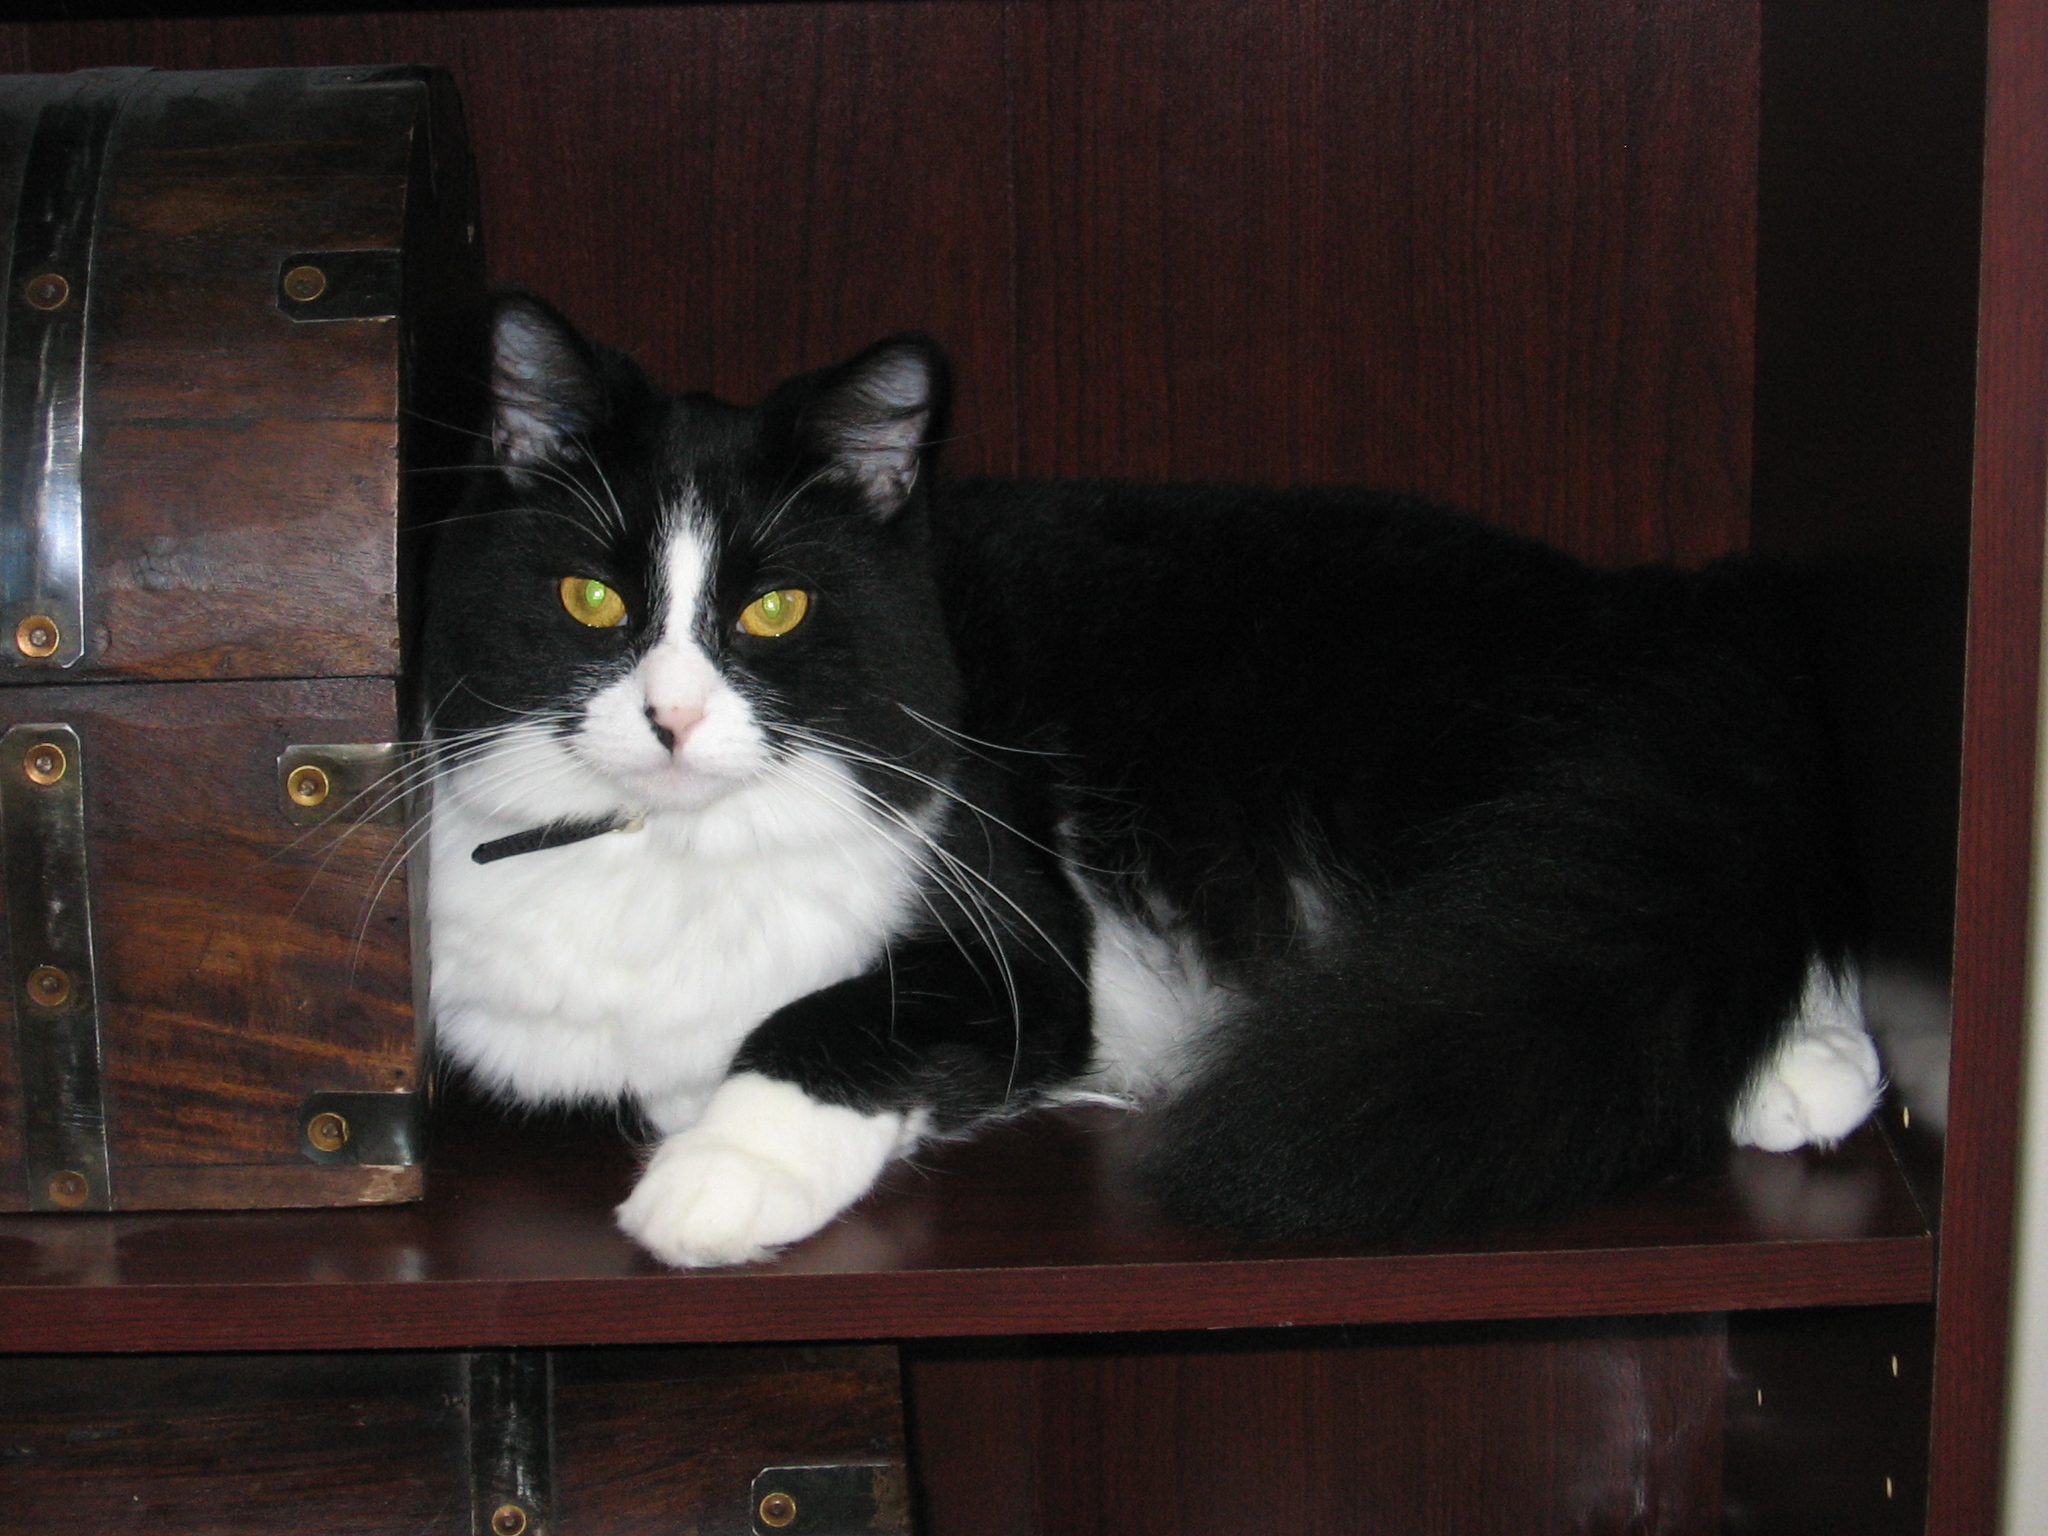 Nikita sitting on a dark wooden shelf, between the side and a wooden chest.